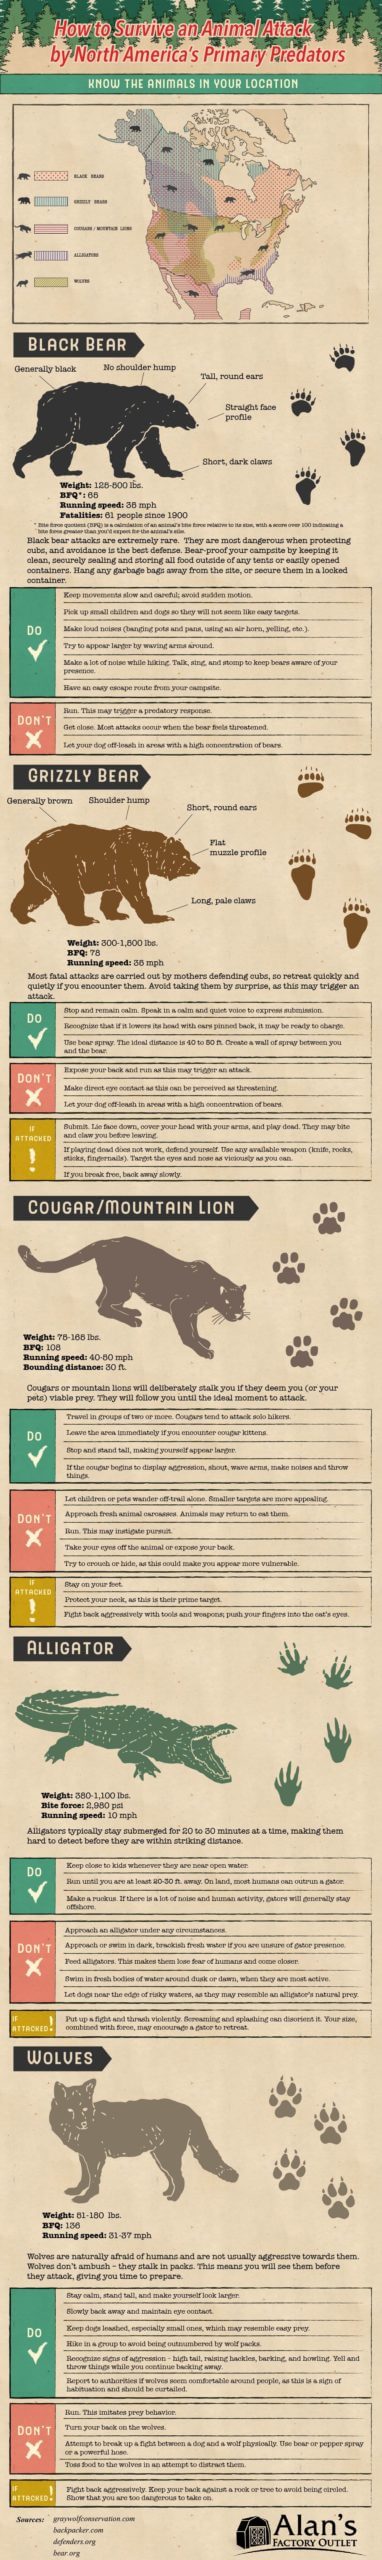 How to Survive an Animal Attack by North America’s Primary Predators